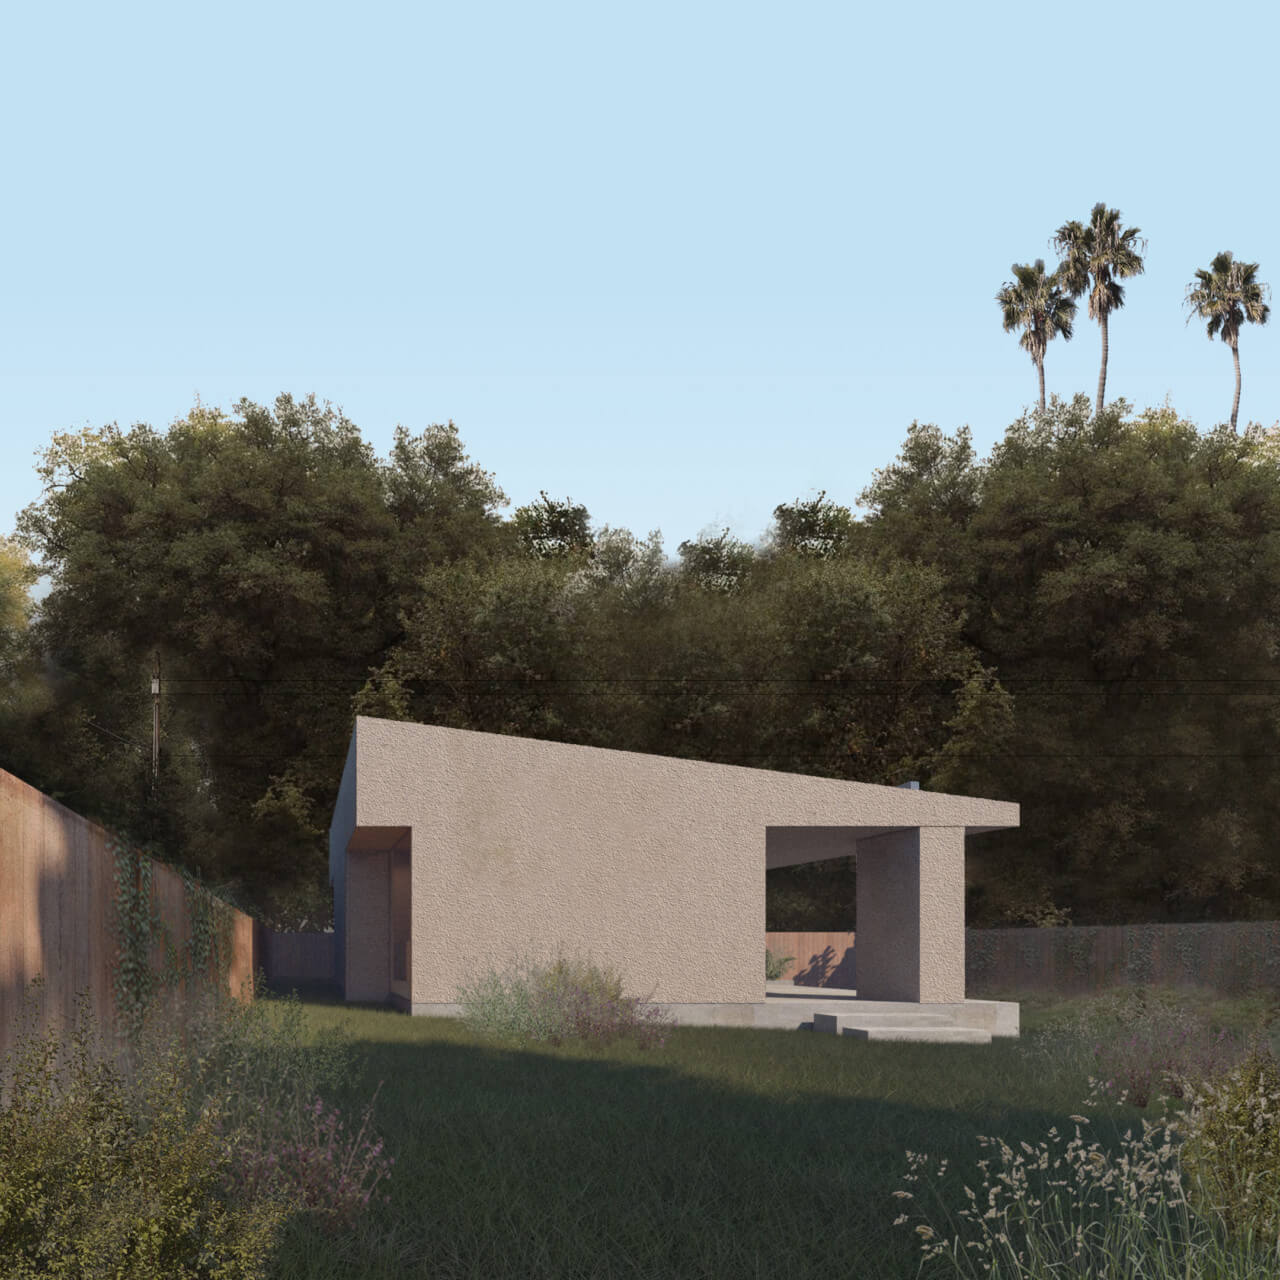 low-angled rendering depicting the exterior of an unbuilt but pre-approved accessory dwelling unit for los angeles